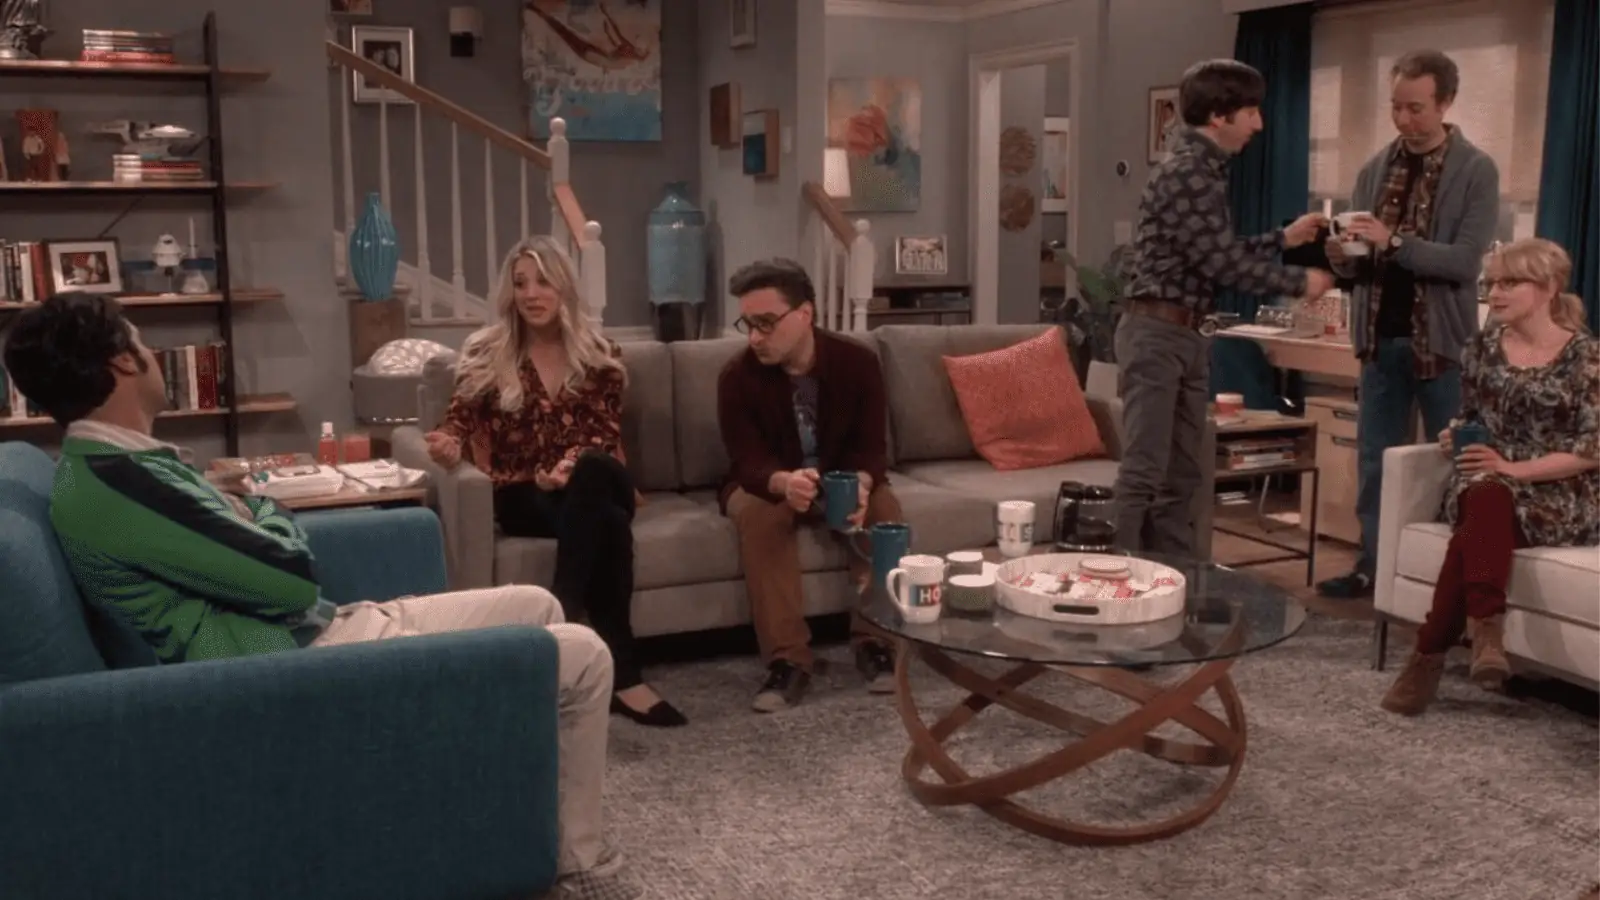 Scene from The Big Bang Theory